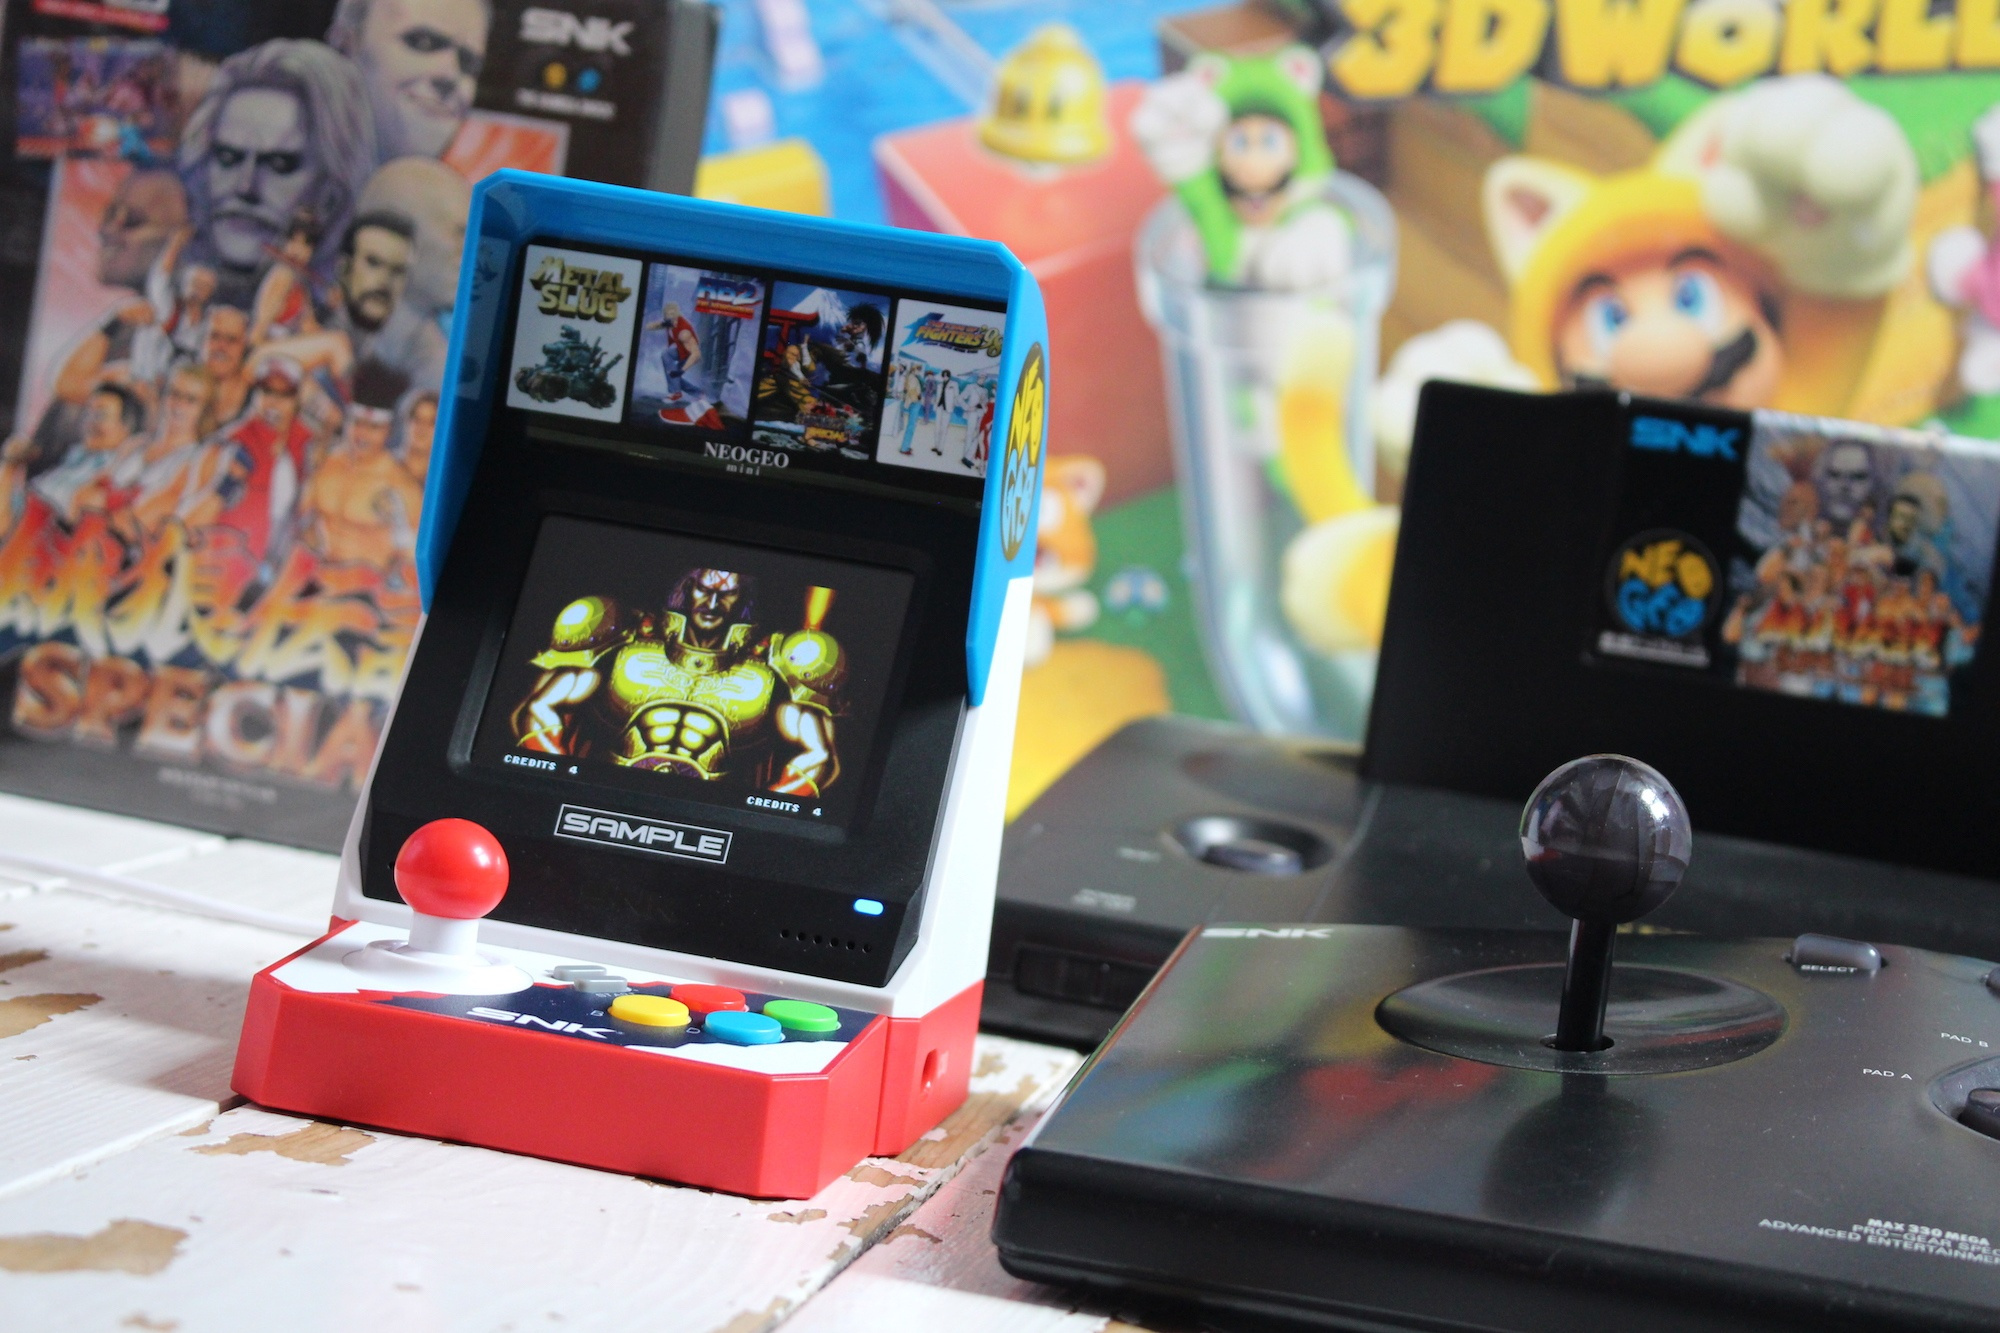 Pre-Orders For The International Edition SNK Neo Geo Mini Go Live Next